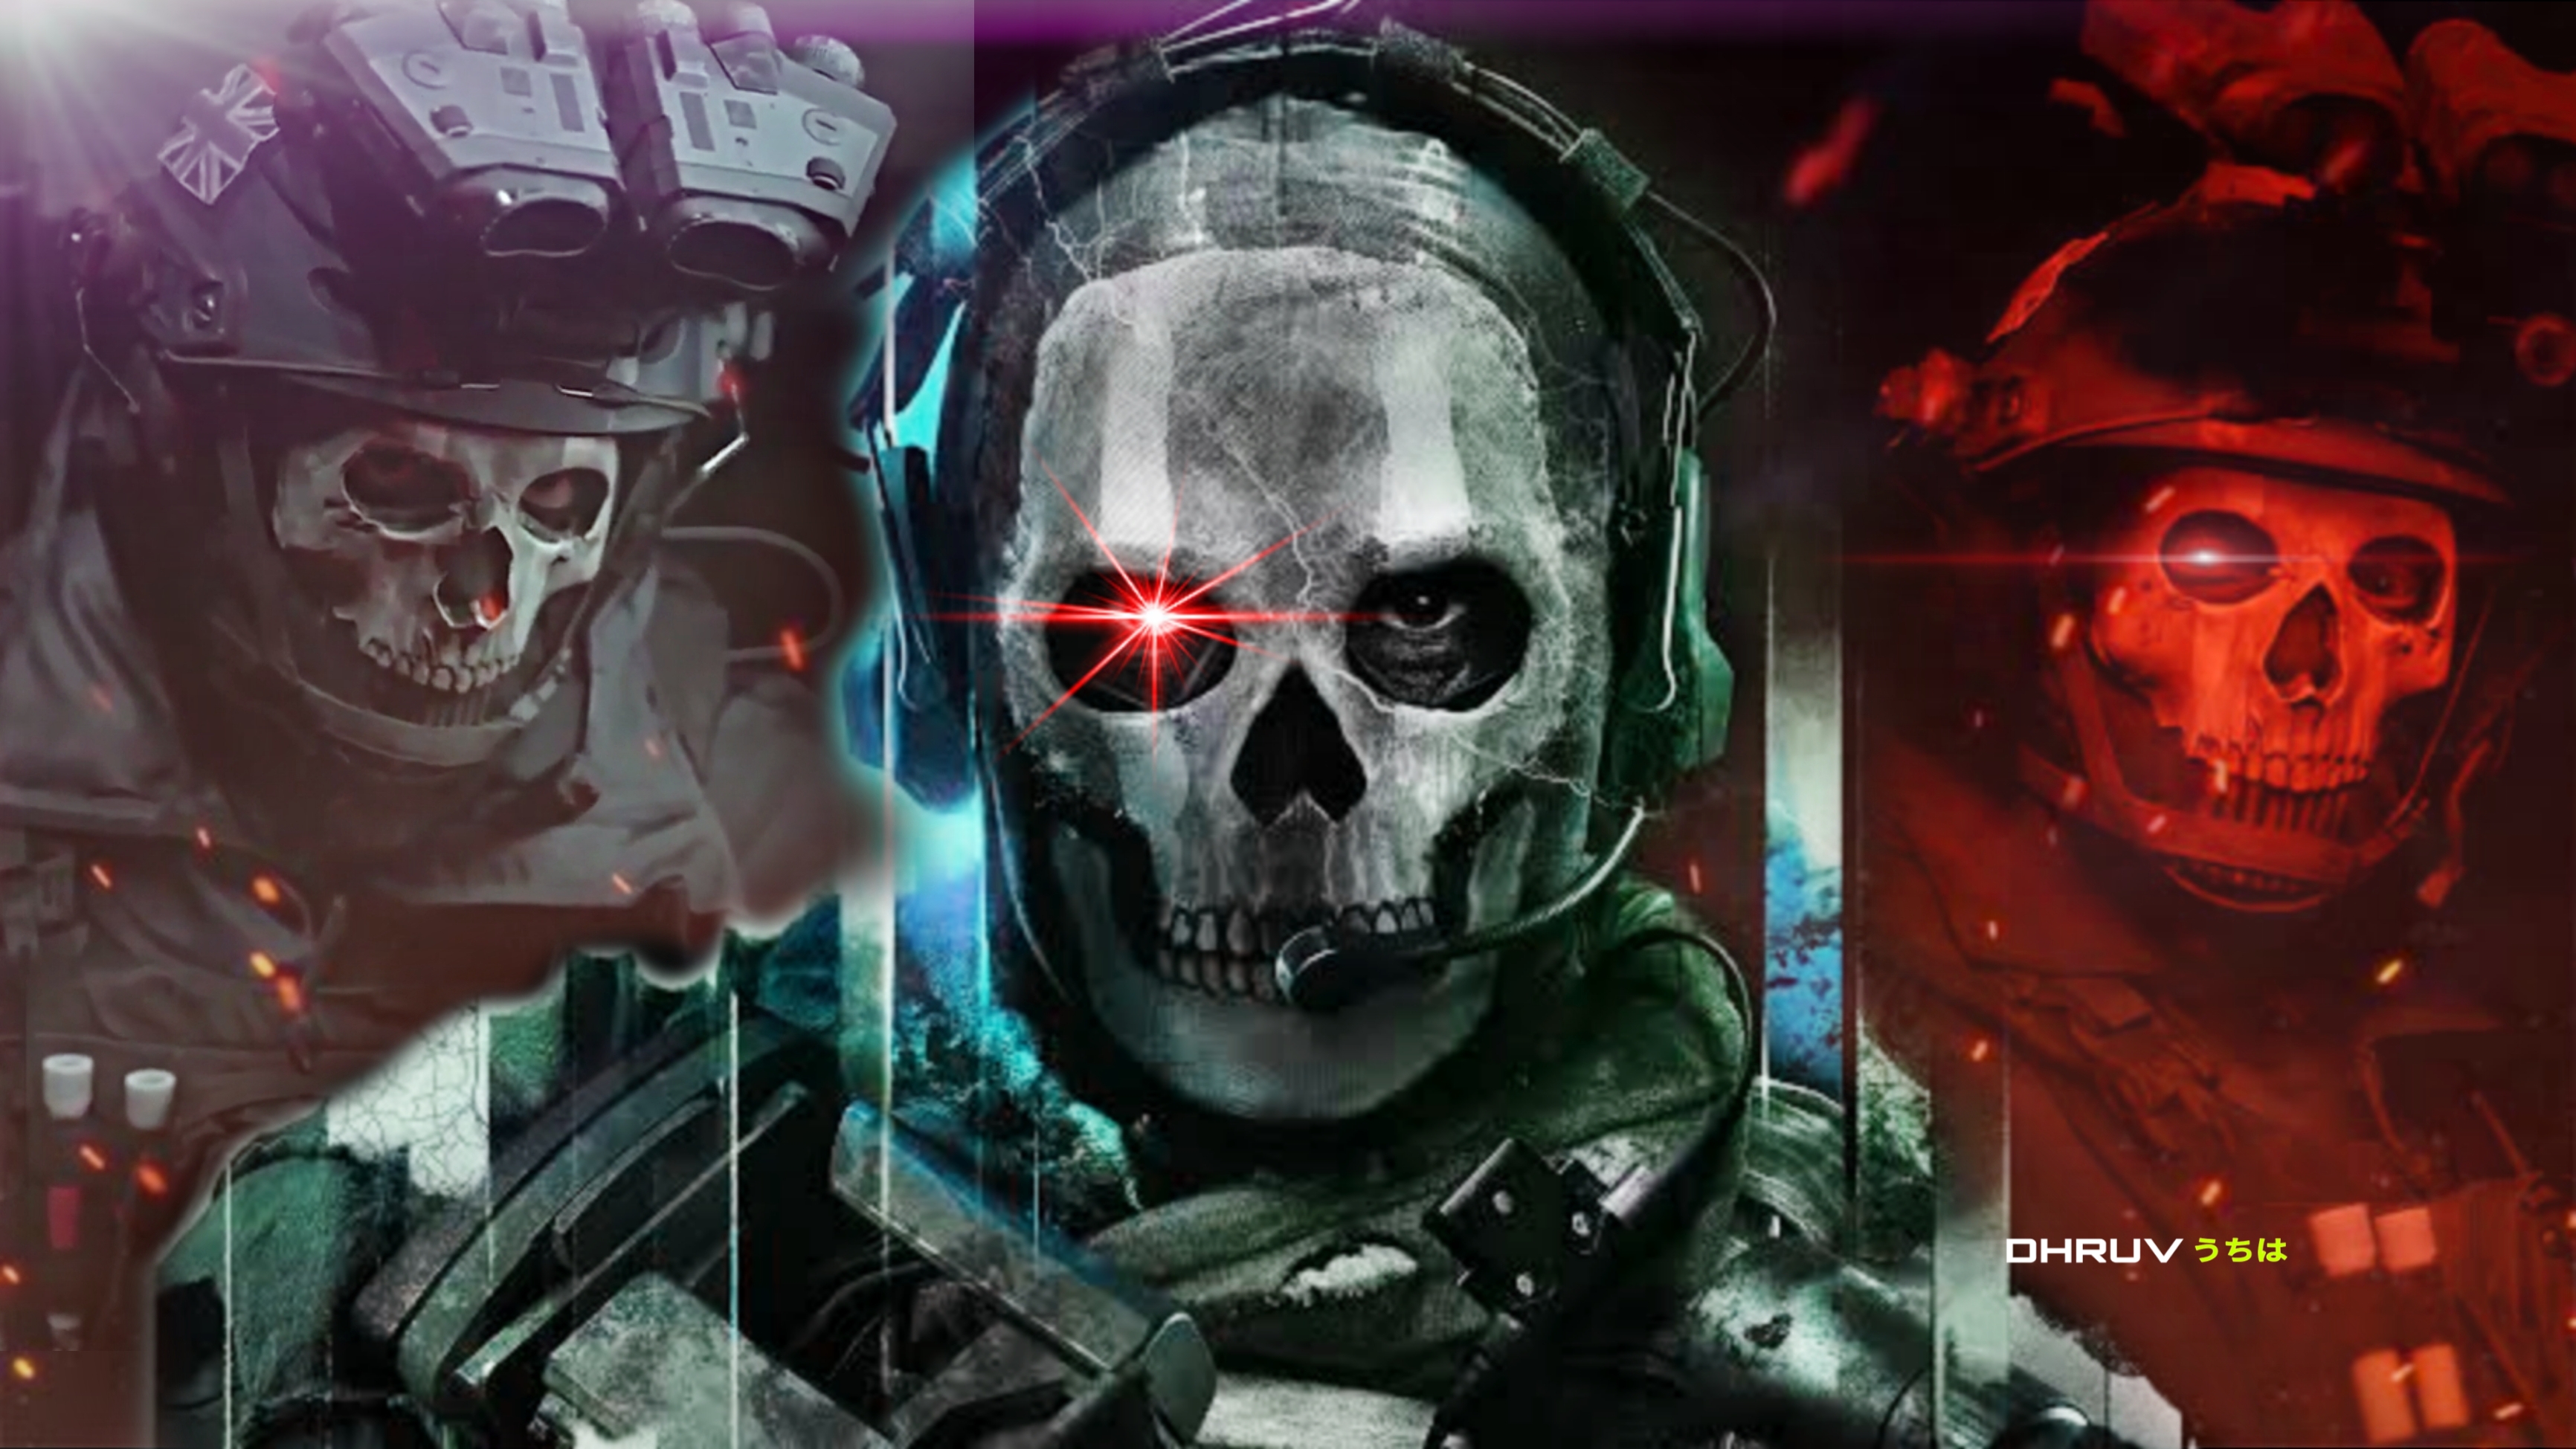 Call of Duty MW2 Ghost by xMiKeZzHD on DeviantArt